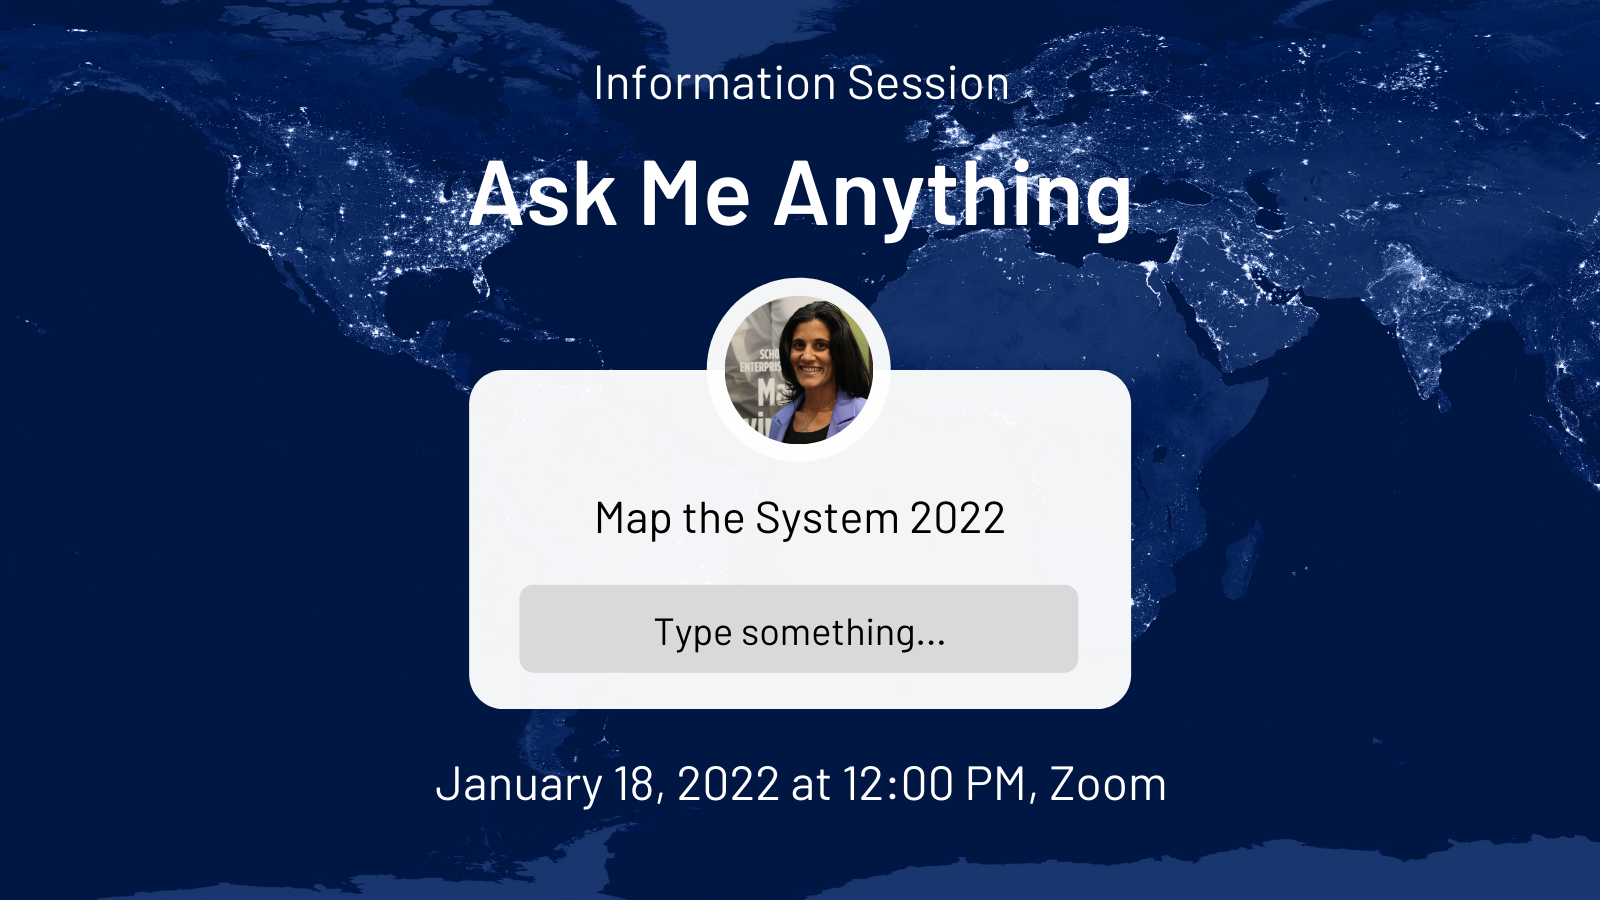 Map the System Information Session